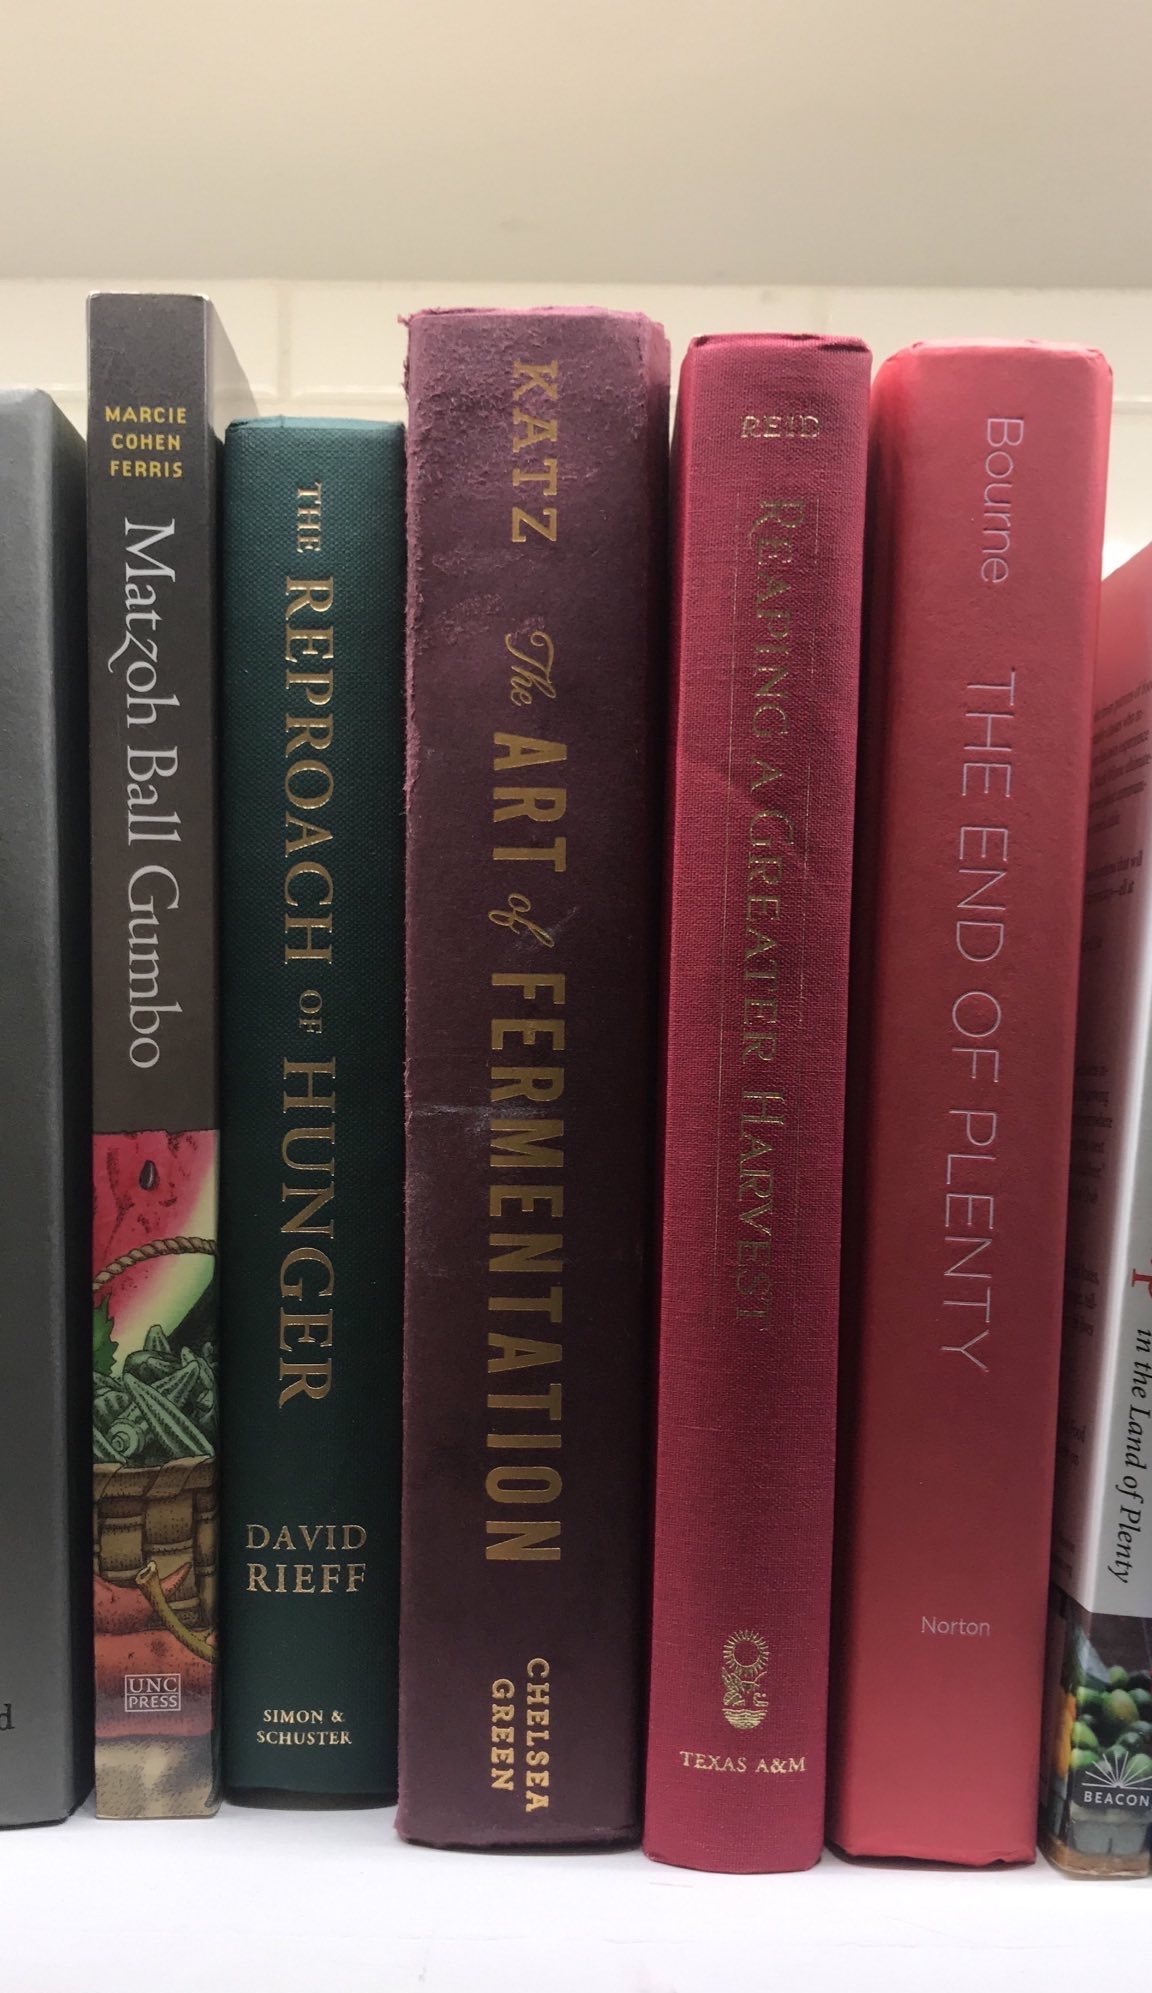 Closeup of the bookshelf, containing titles: 'Matzoh Ball Gumbo', 'Reproach of Hunger', 'The Art of Fermentation', 'Reaping A Creater Harvest', and 'The End of Plenty'